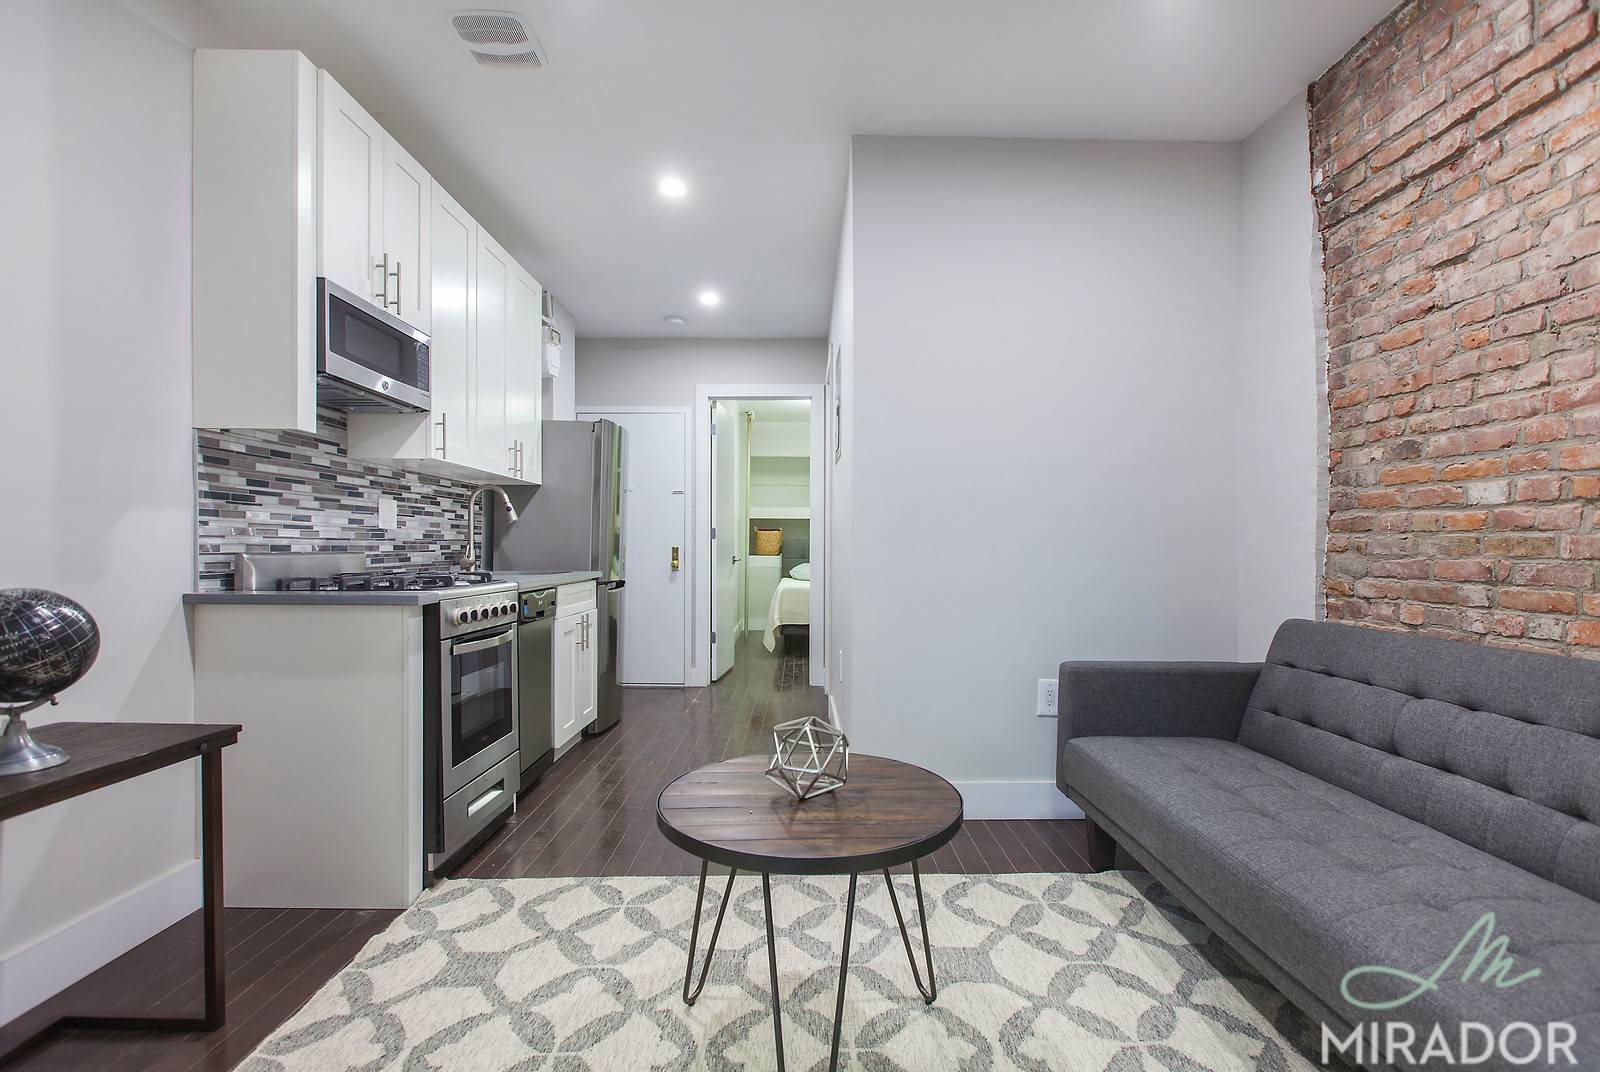 Available for a ASAP occupancy NO BROKER FEE to Mirador TWO FLIGHTS UP TO THIS FULLY RENOVATED APT I LOVE THIS APARTMENT Just two flights up, this is a fantastic ...